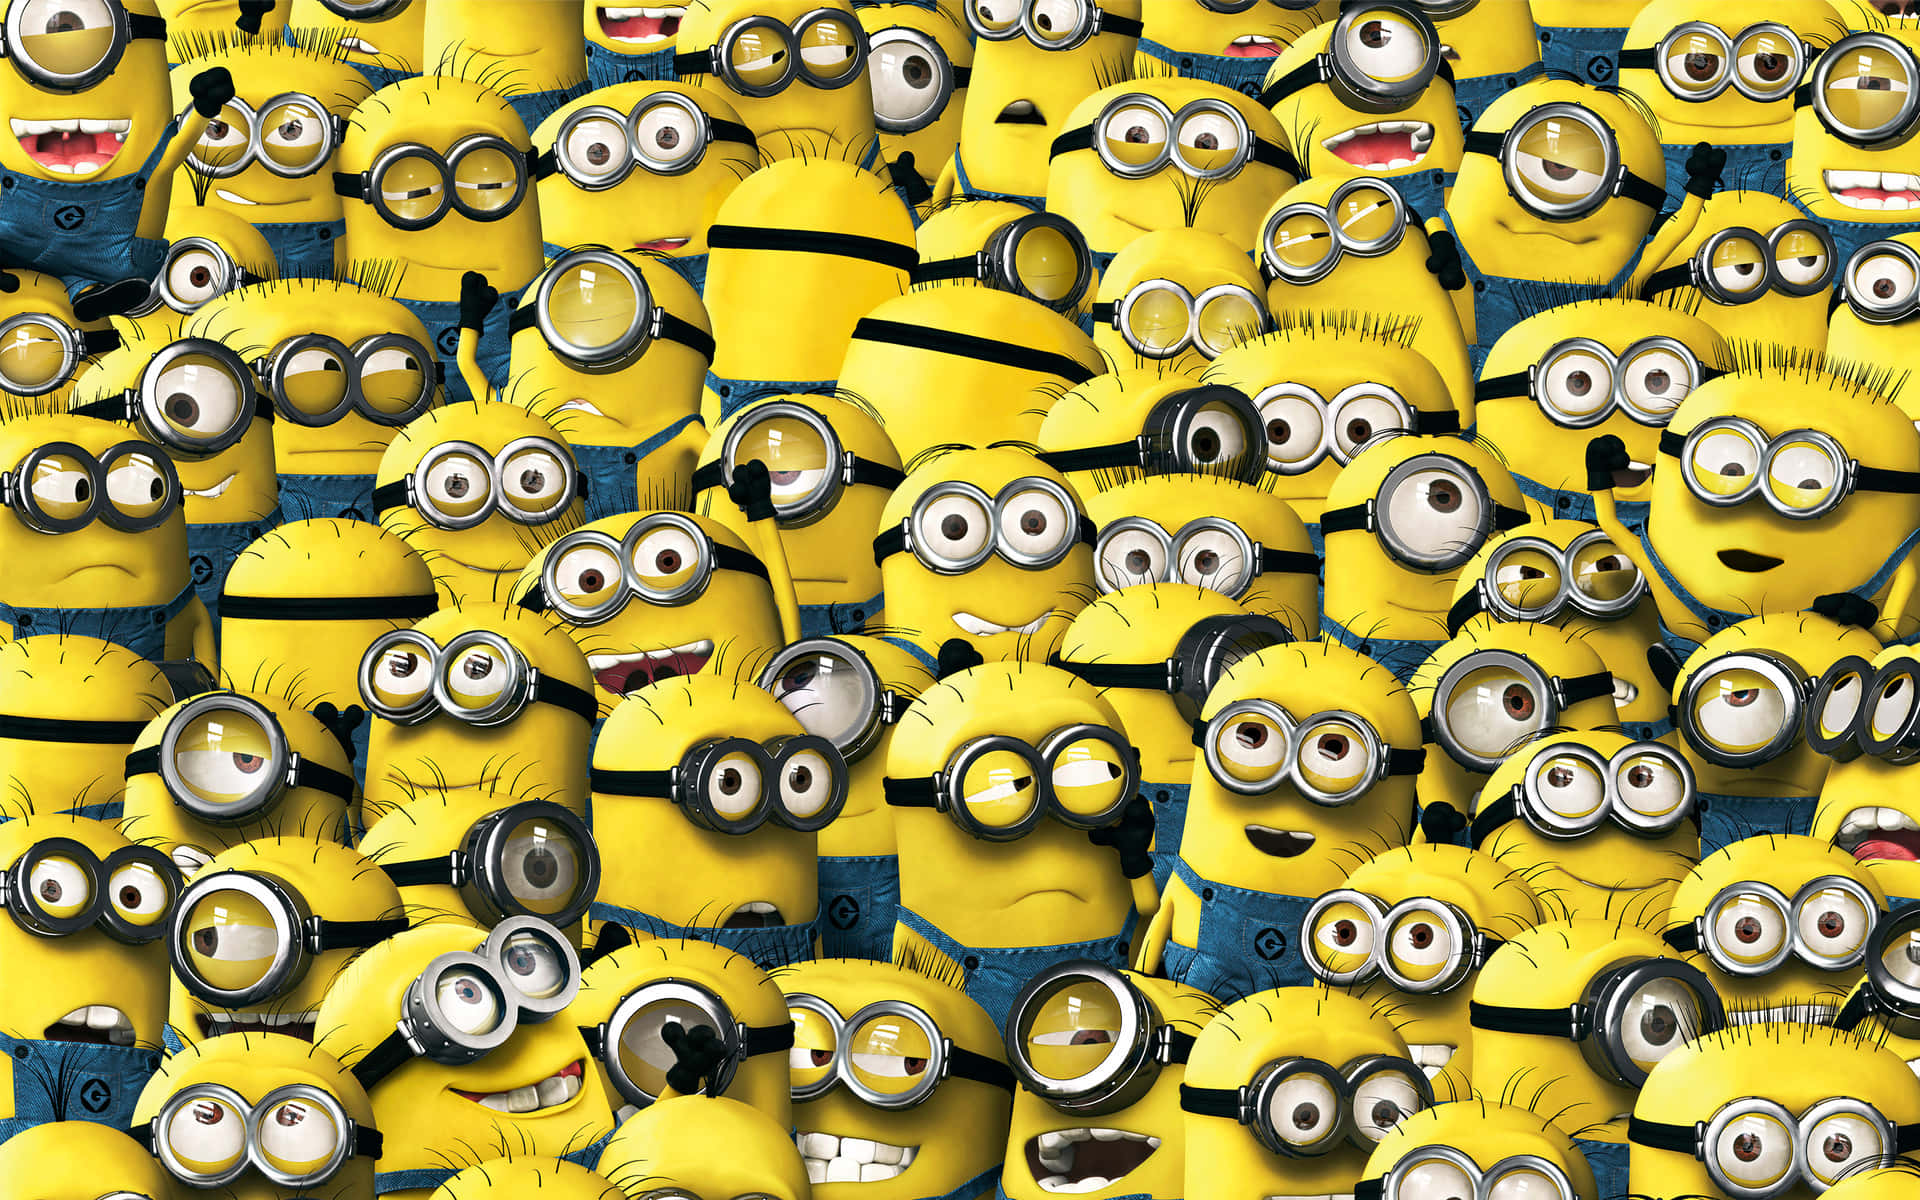 Get ready to make your day with a Minion!